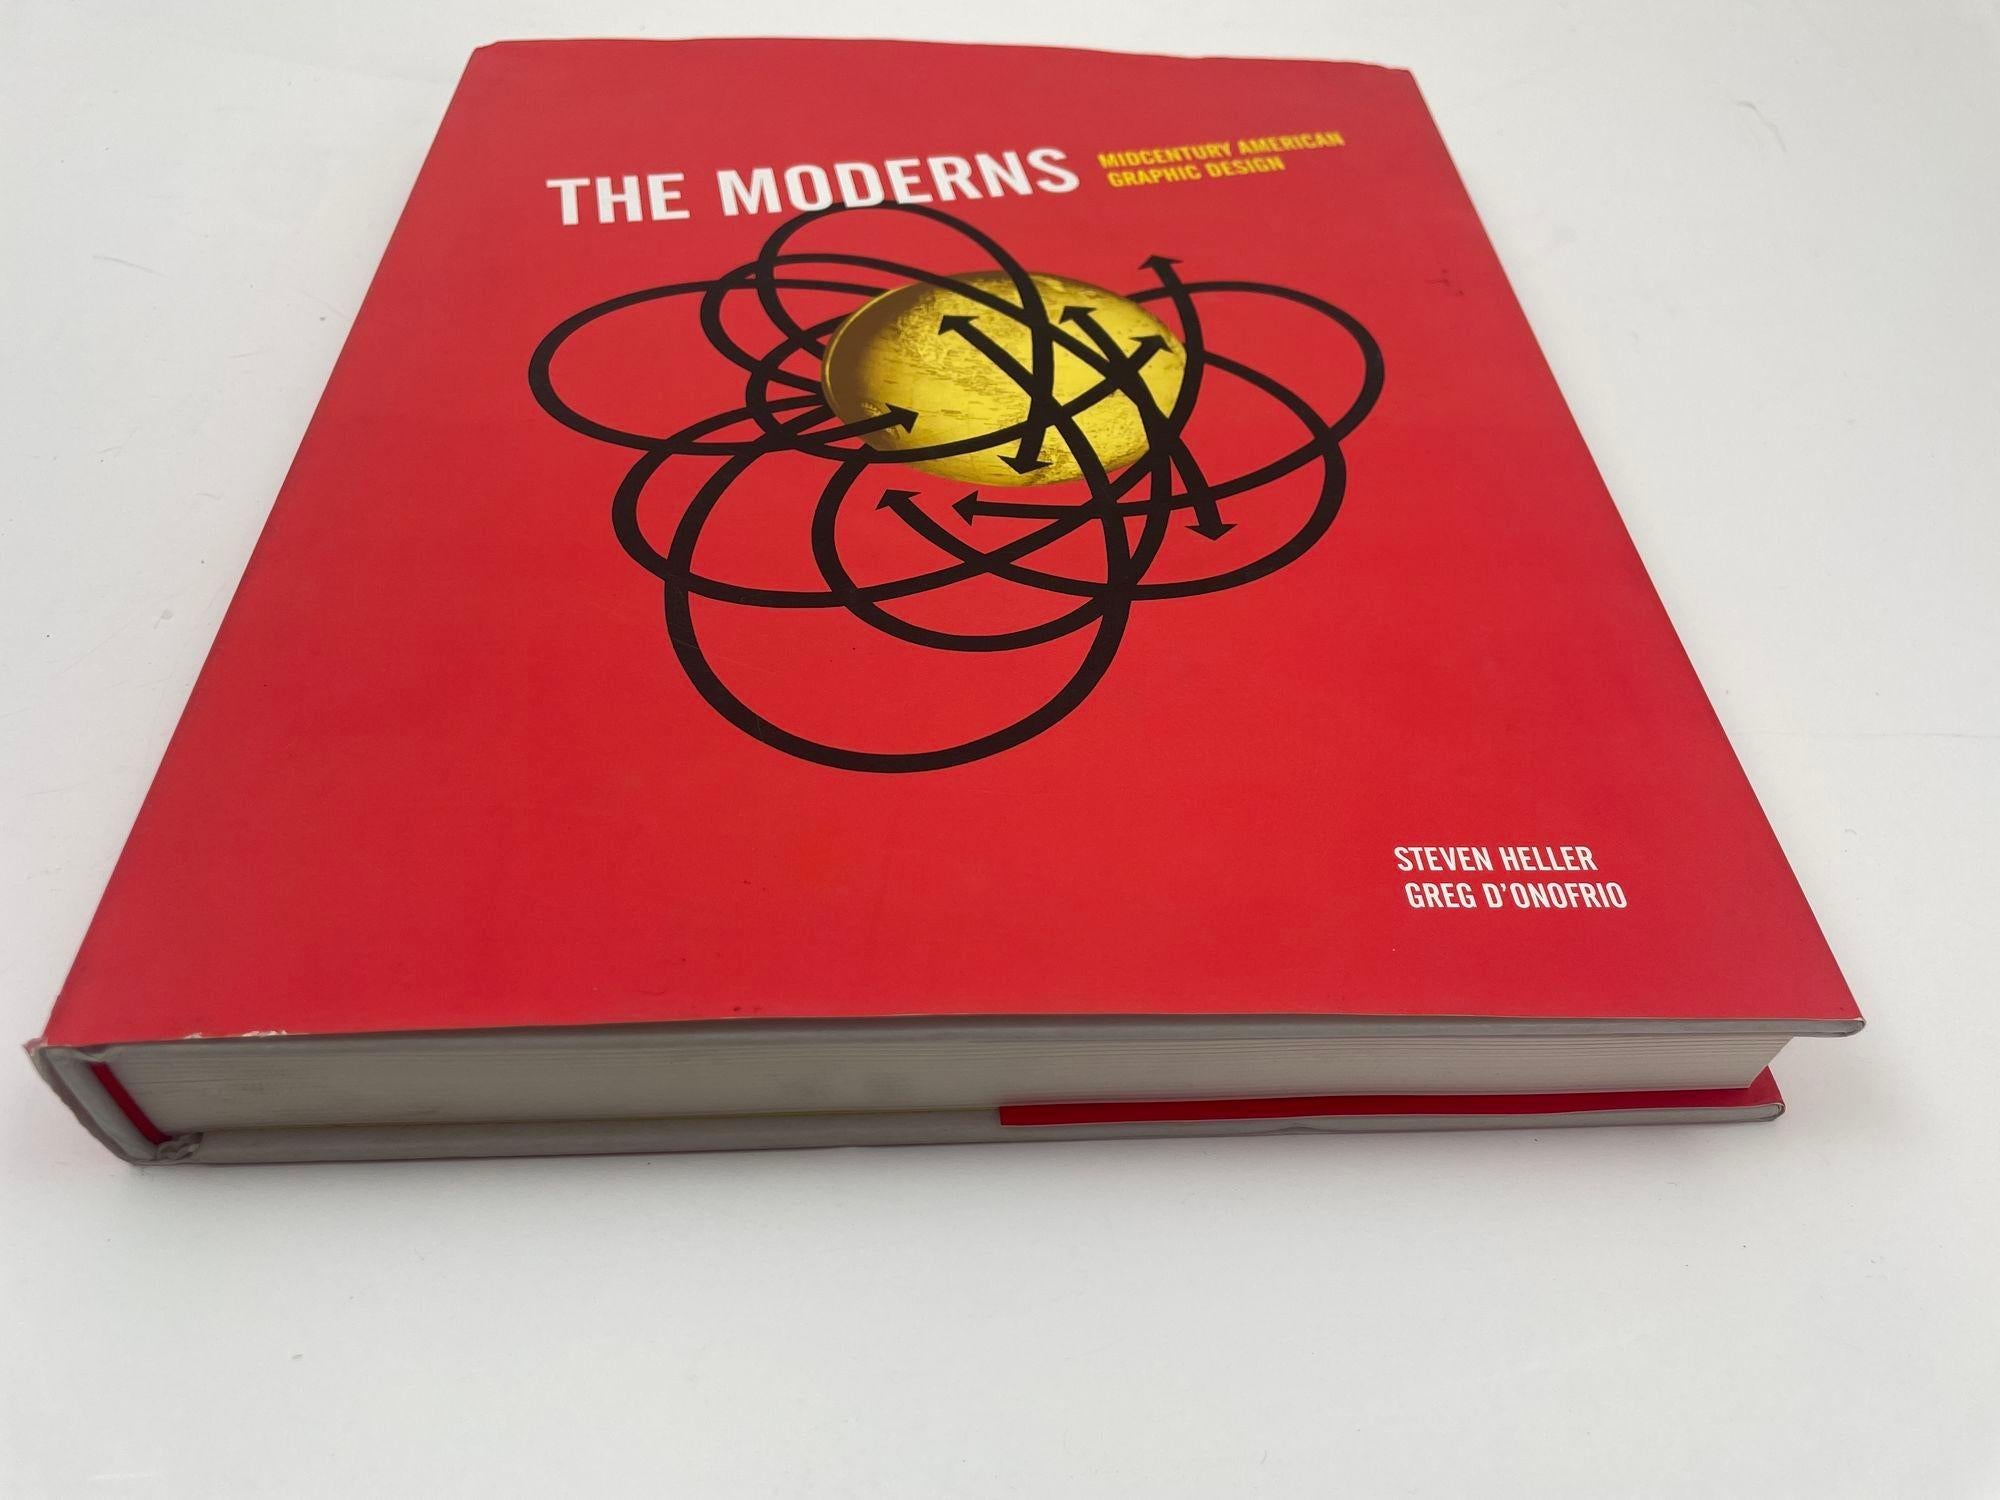 The Moderns: Mid-century American Graphic Design Hardcover – September 19, 2017 by Steven Heller (Author), Greg D'Onofrio (Author). In The Moderns, we meet the men and women who invented and shaped Mid-century Modern graphic design in America. The